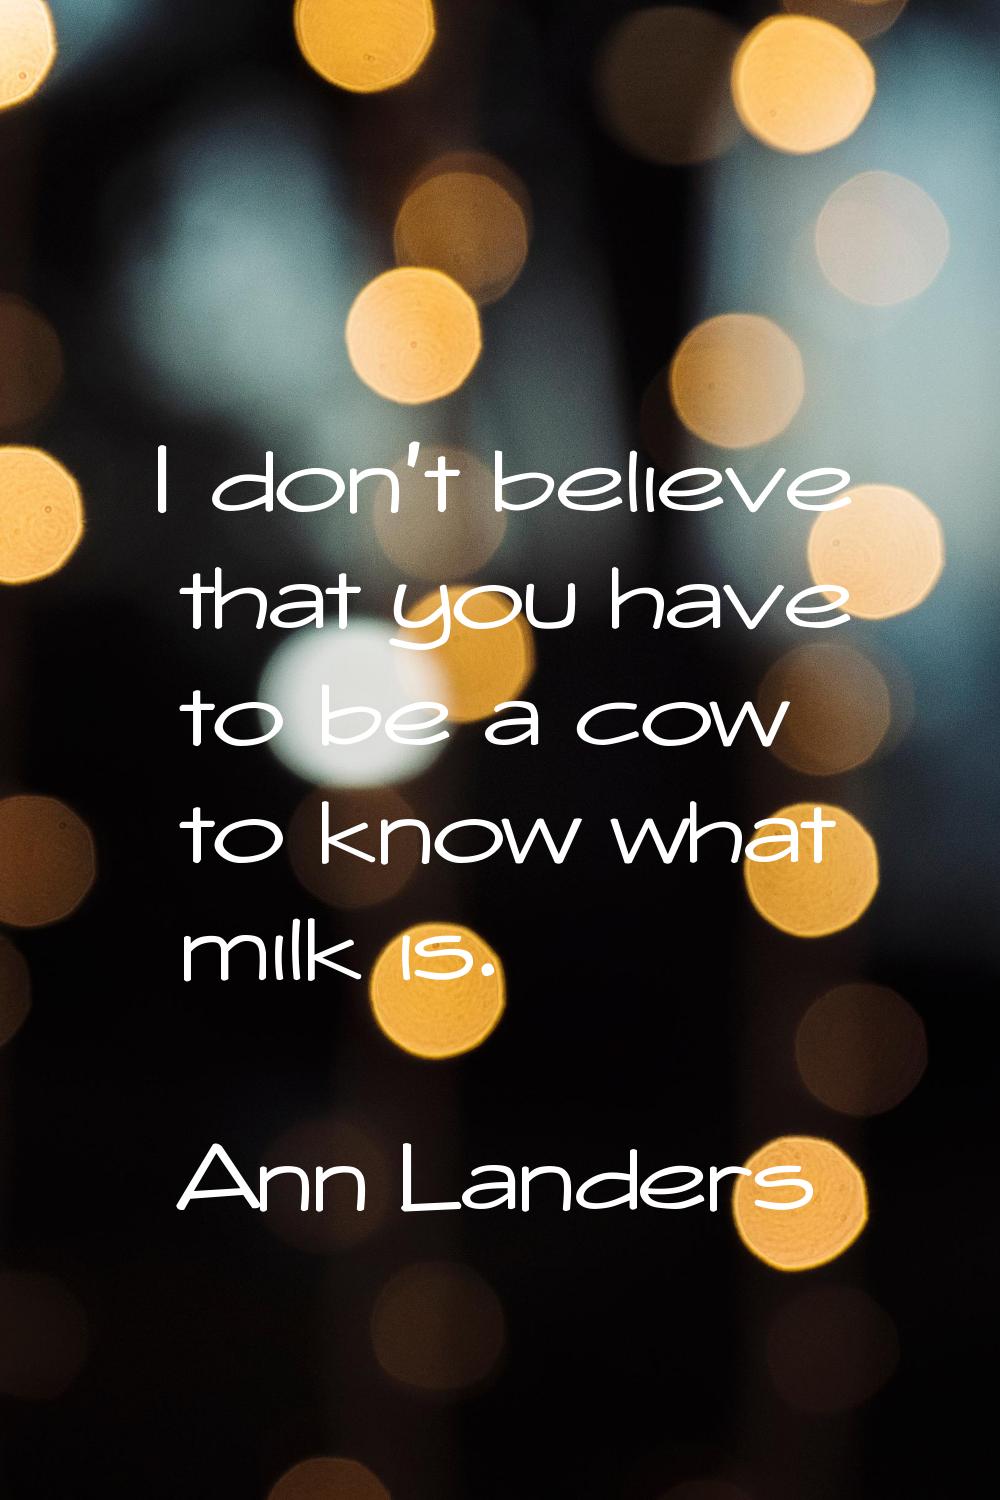 I don't believe that you have to be a cow to know what milk is.